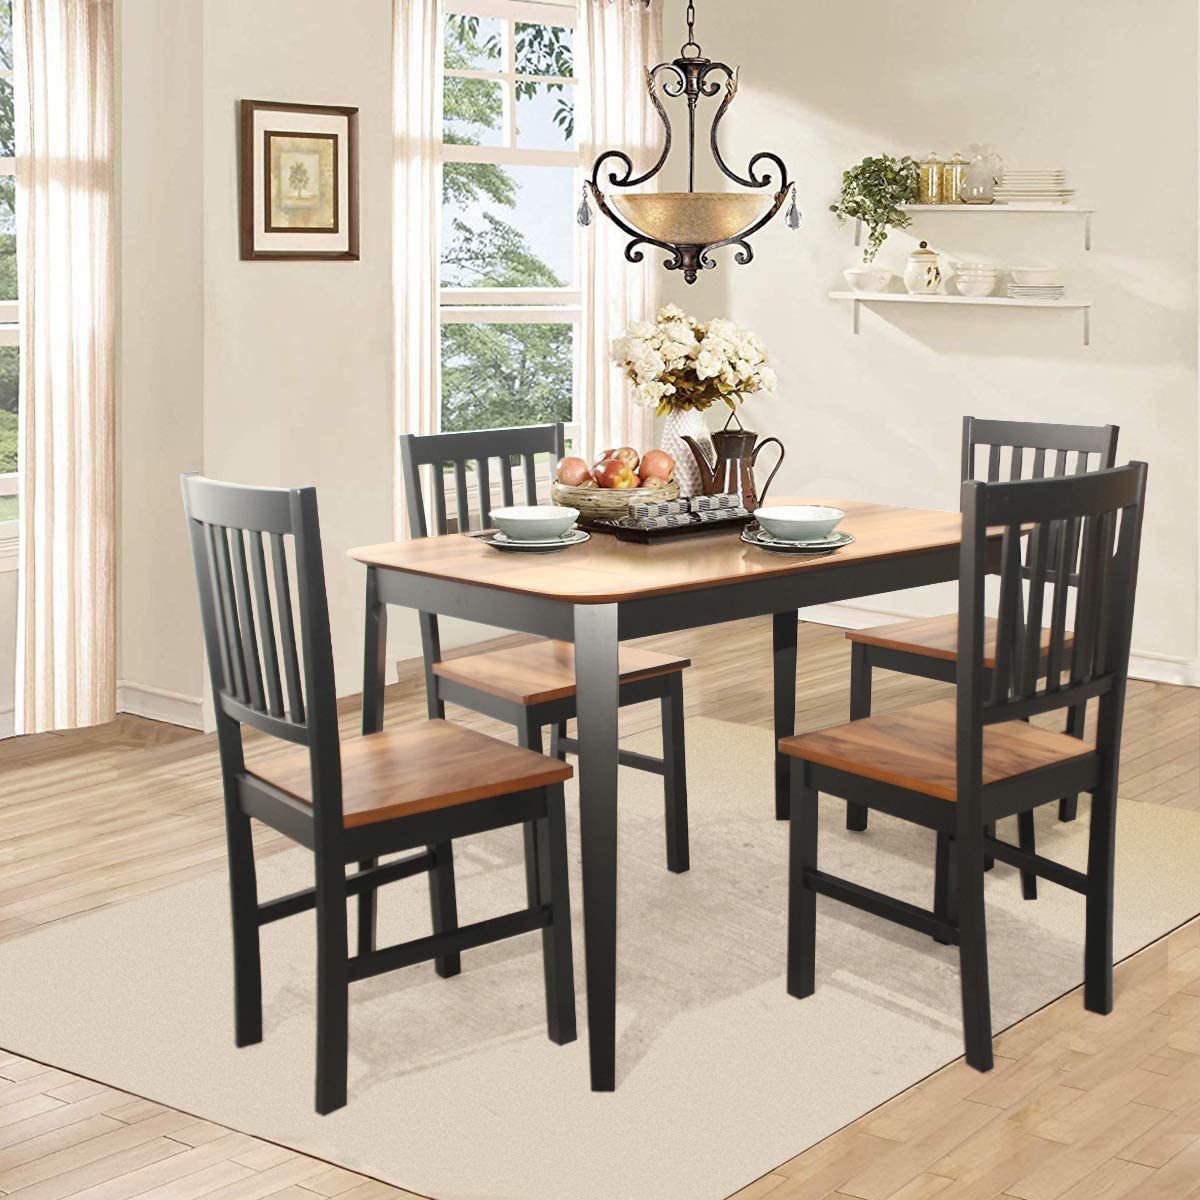 Giantex 5 Piece Dining Set with 4 Chairs,Dining Kitchen Table Set for 4 Person (Walnut & Black)